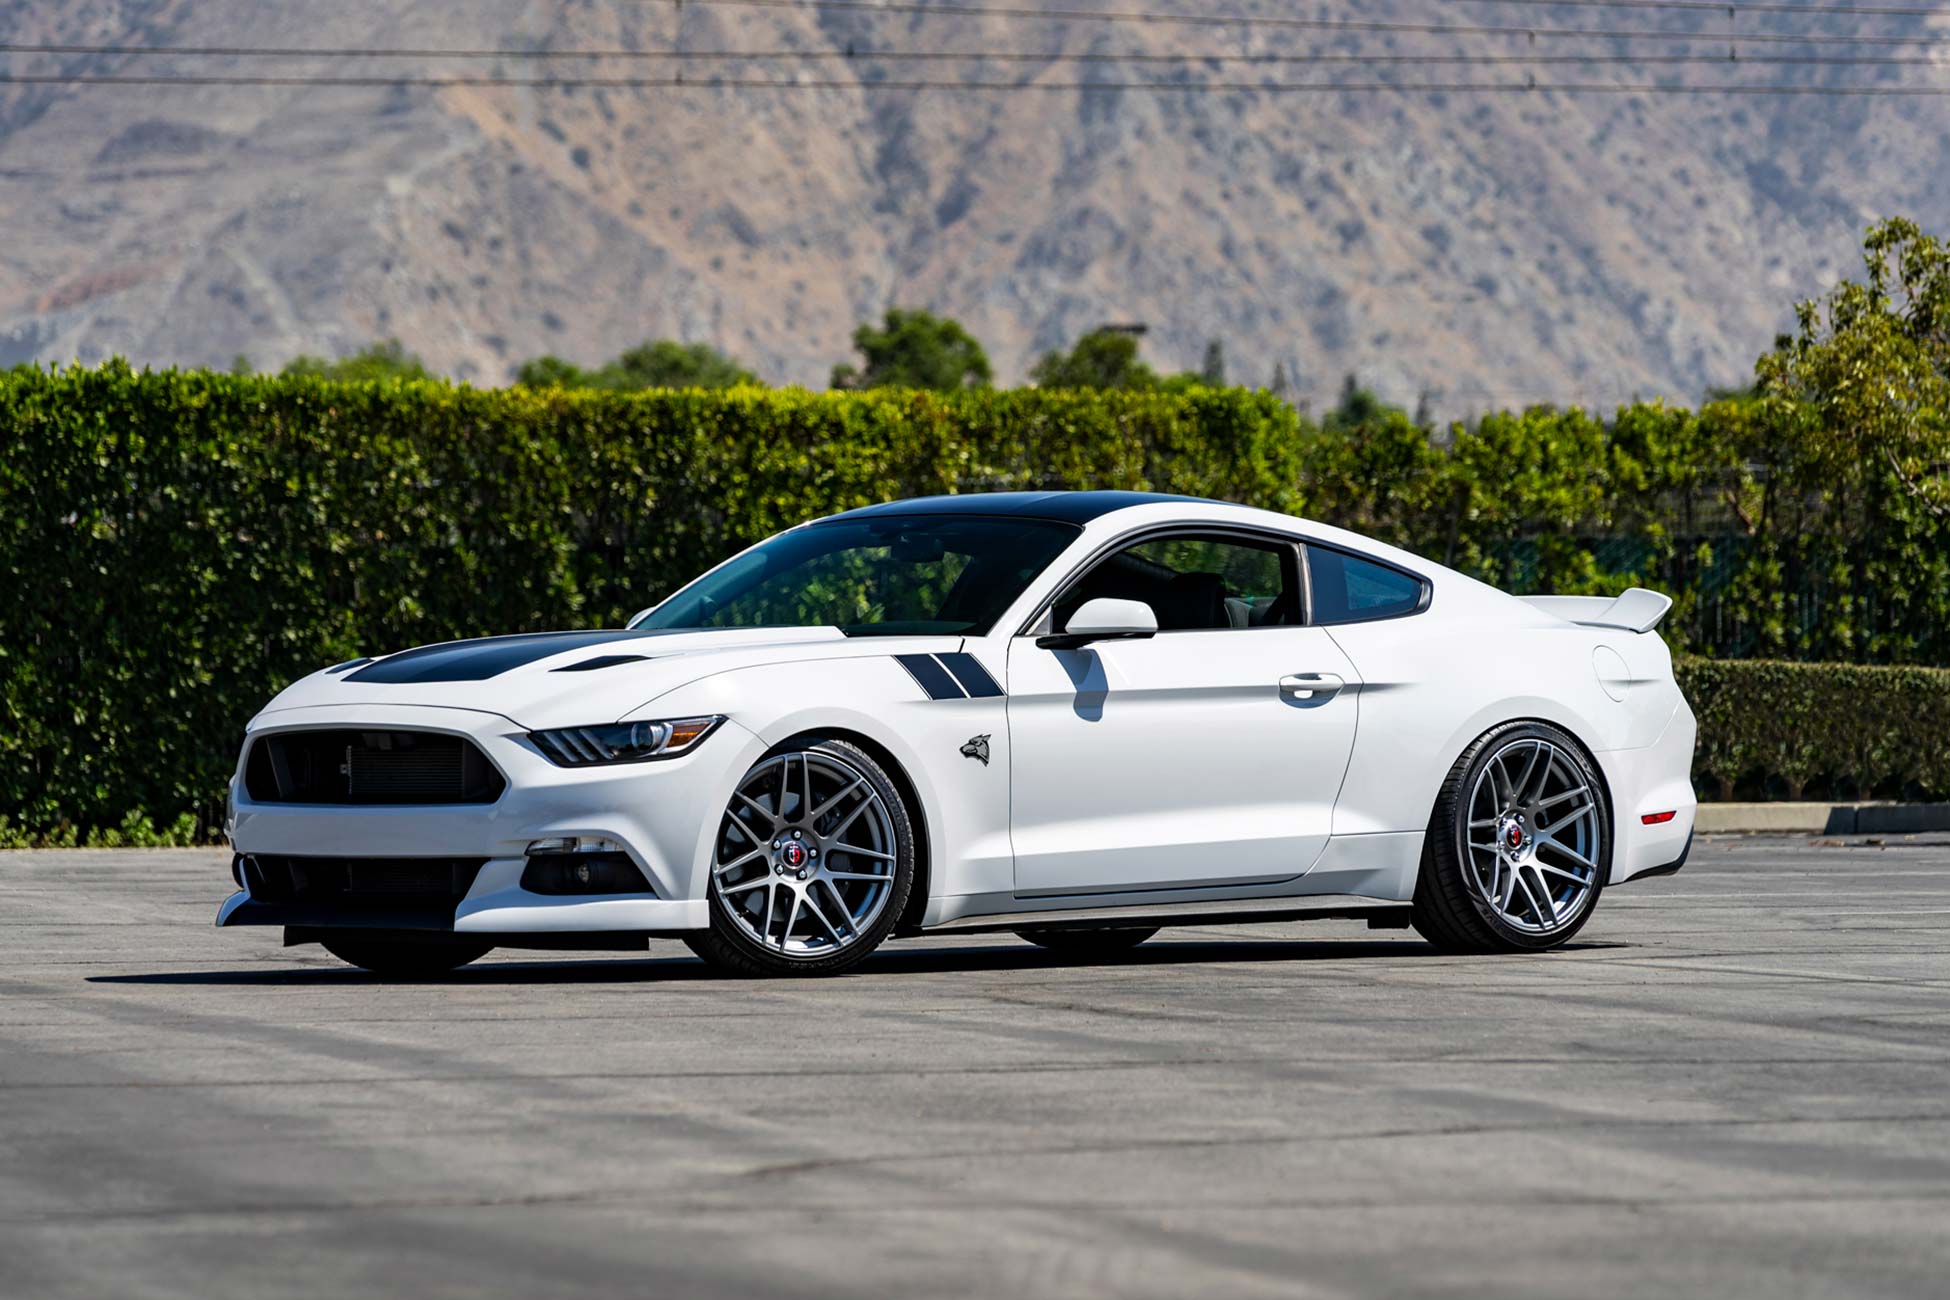 Ford Mustang GT With A Staggered 20x9.5 Front and a 20x10.5 Rear Fitment